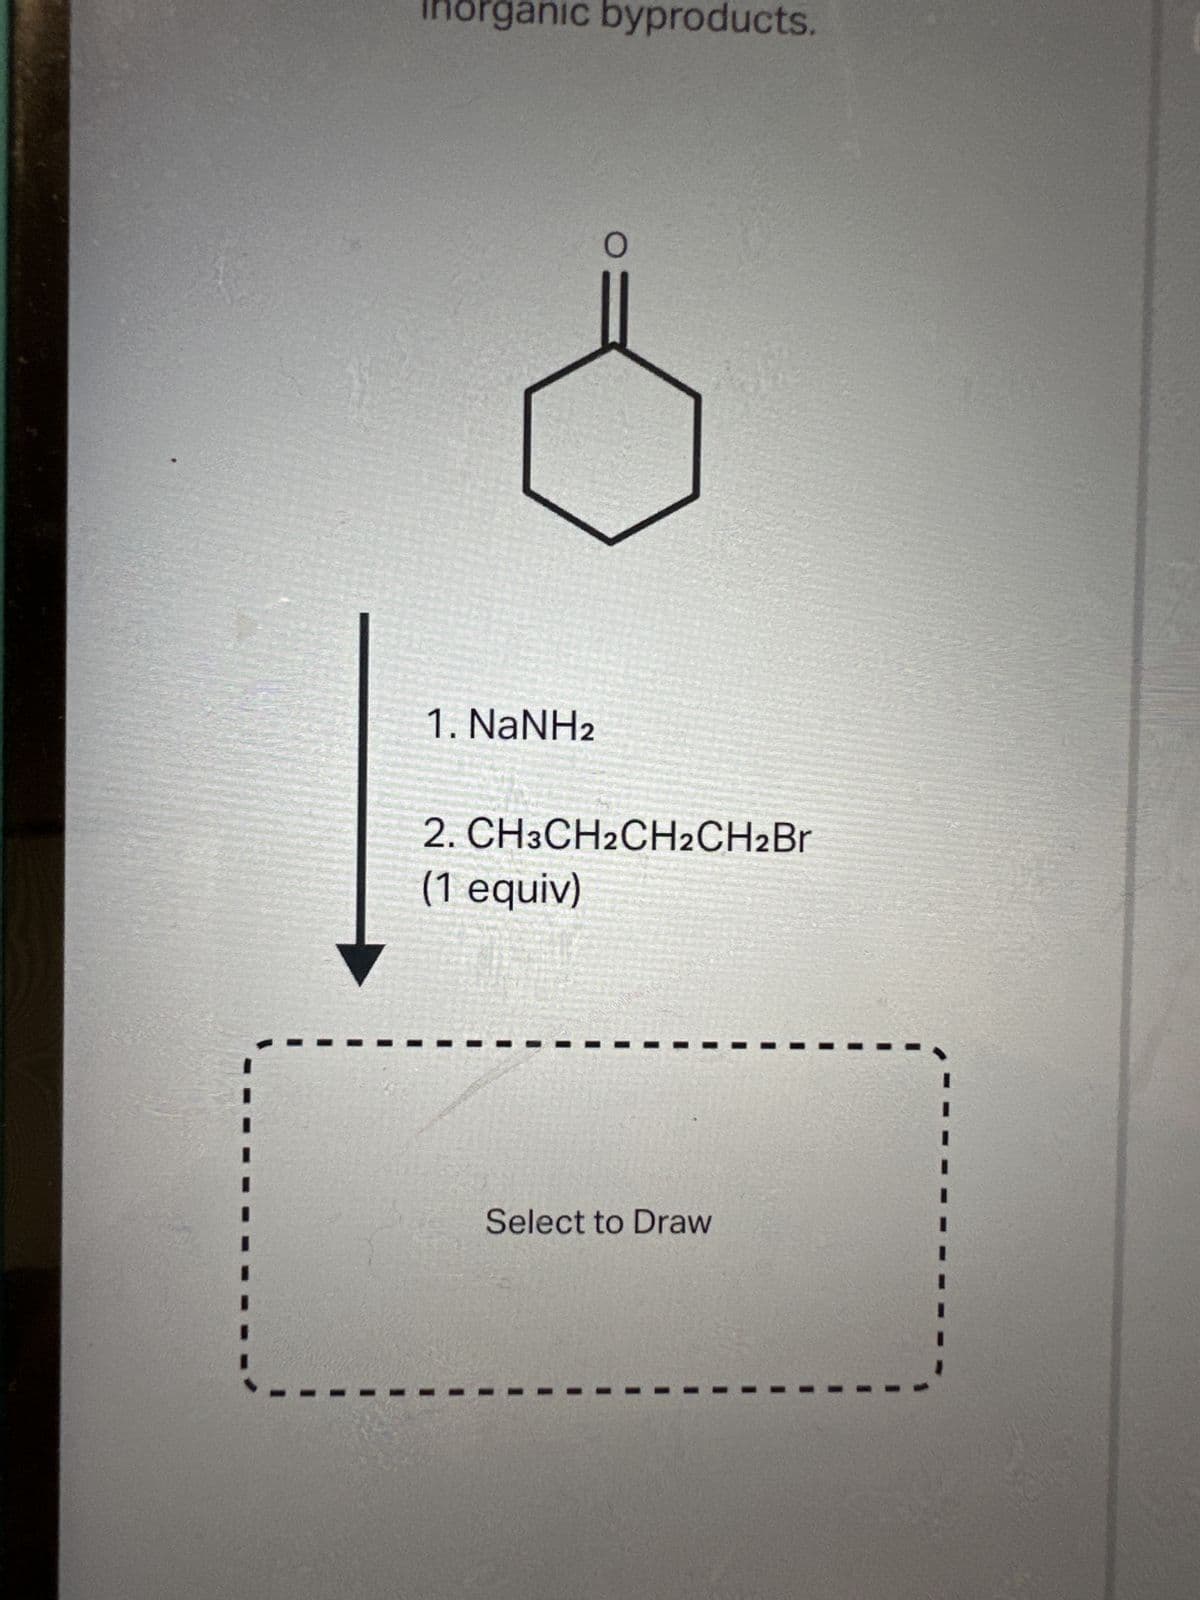 Inorganic byproducts.
1. NaNH2
O
2. CH3CH2CH2CH2Br
(1 equiv)
Select to Draw